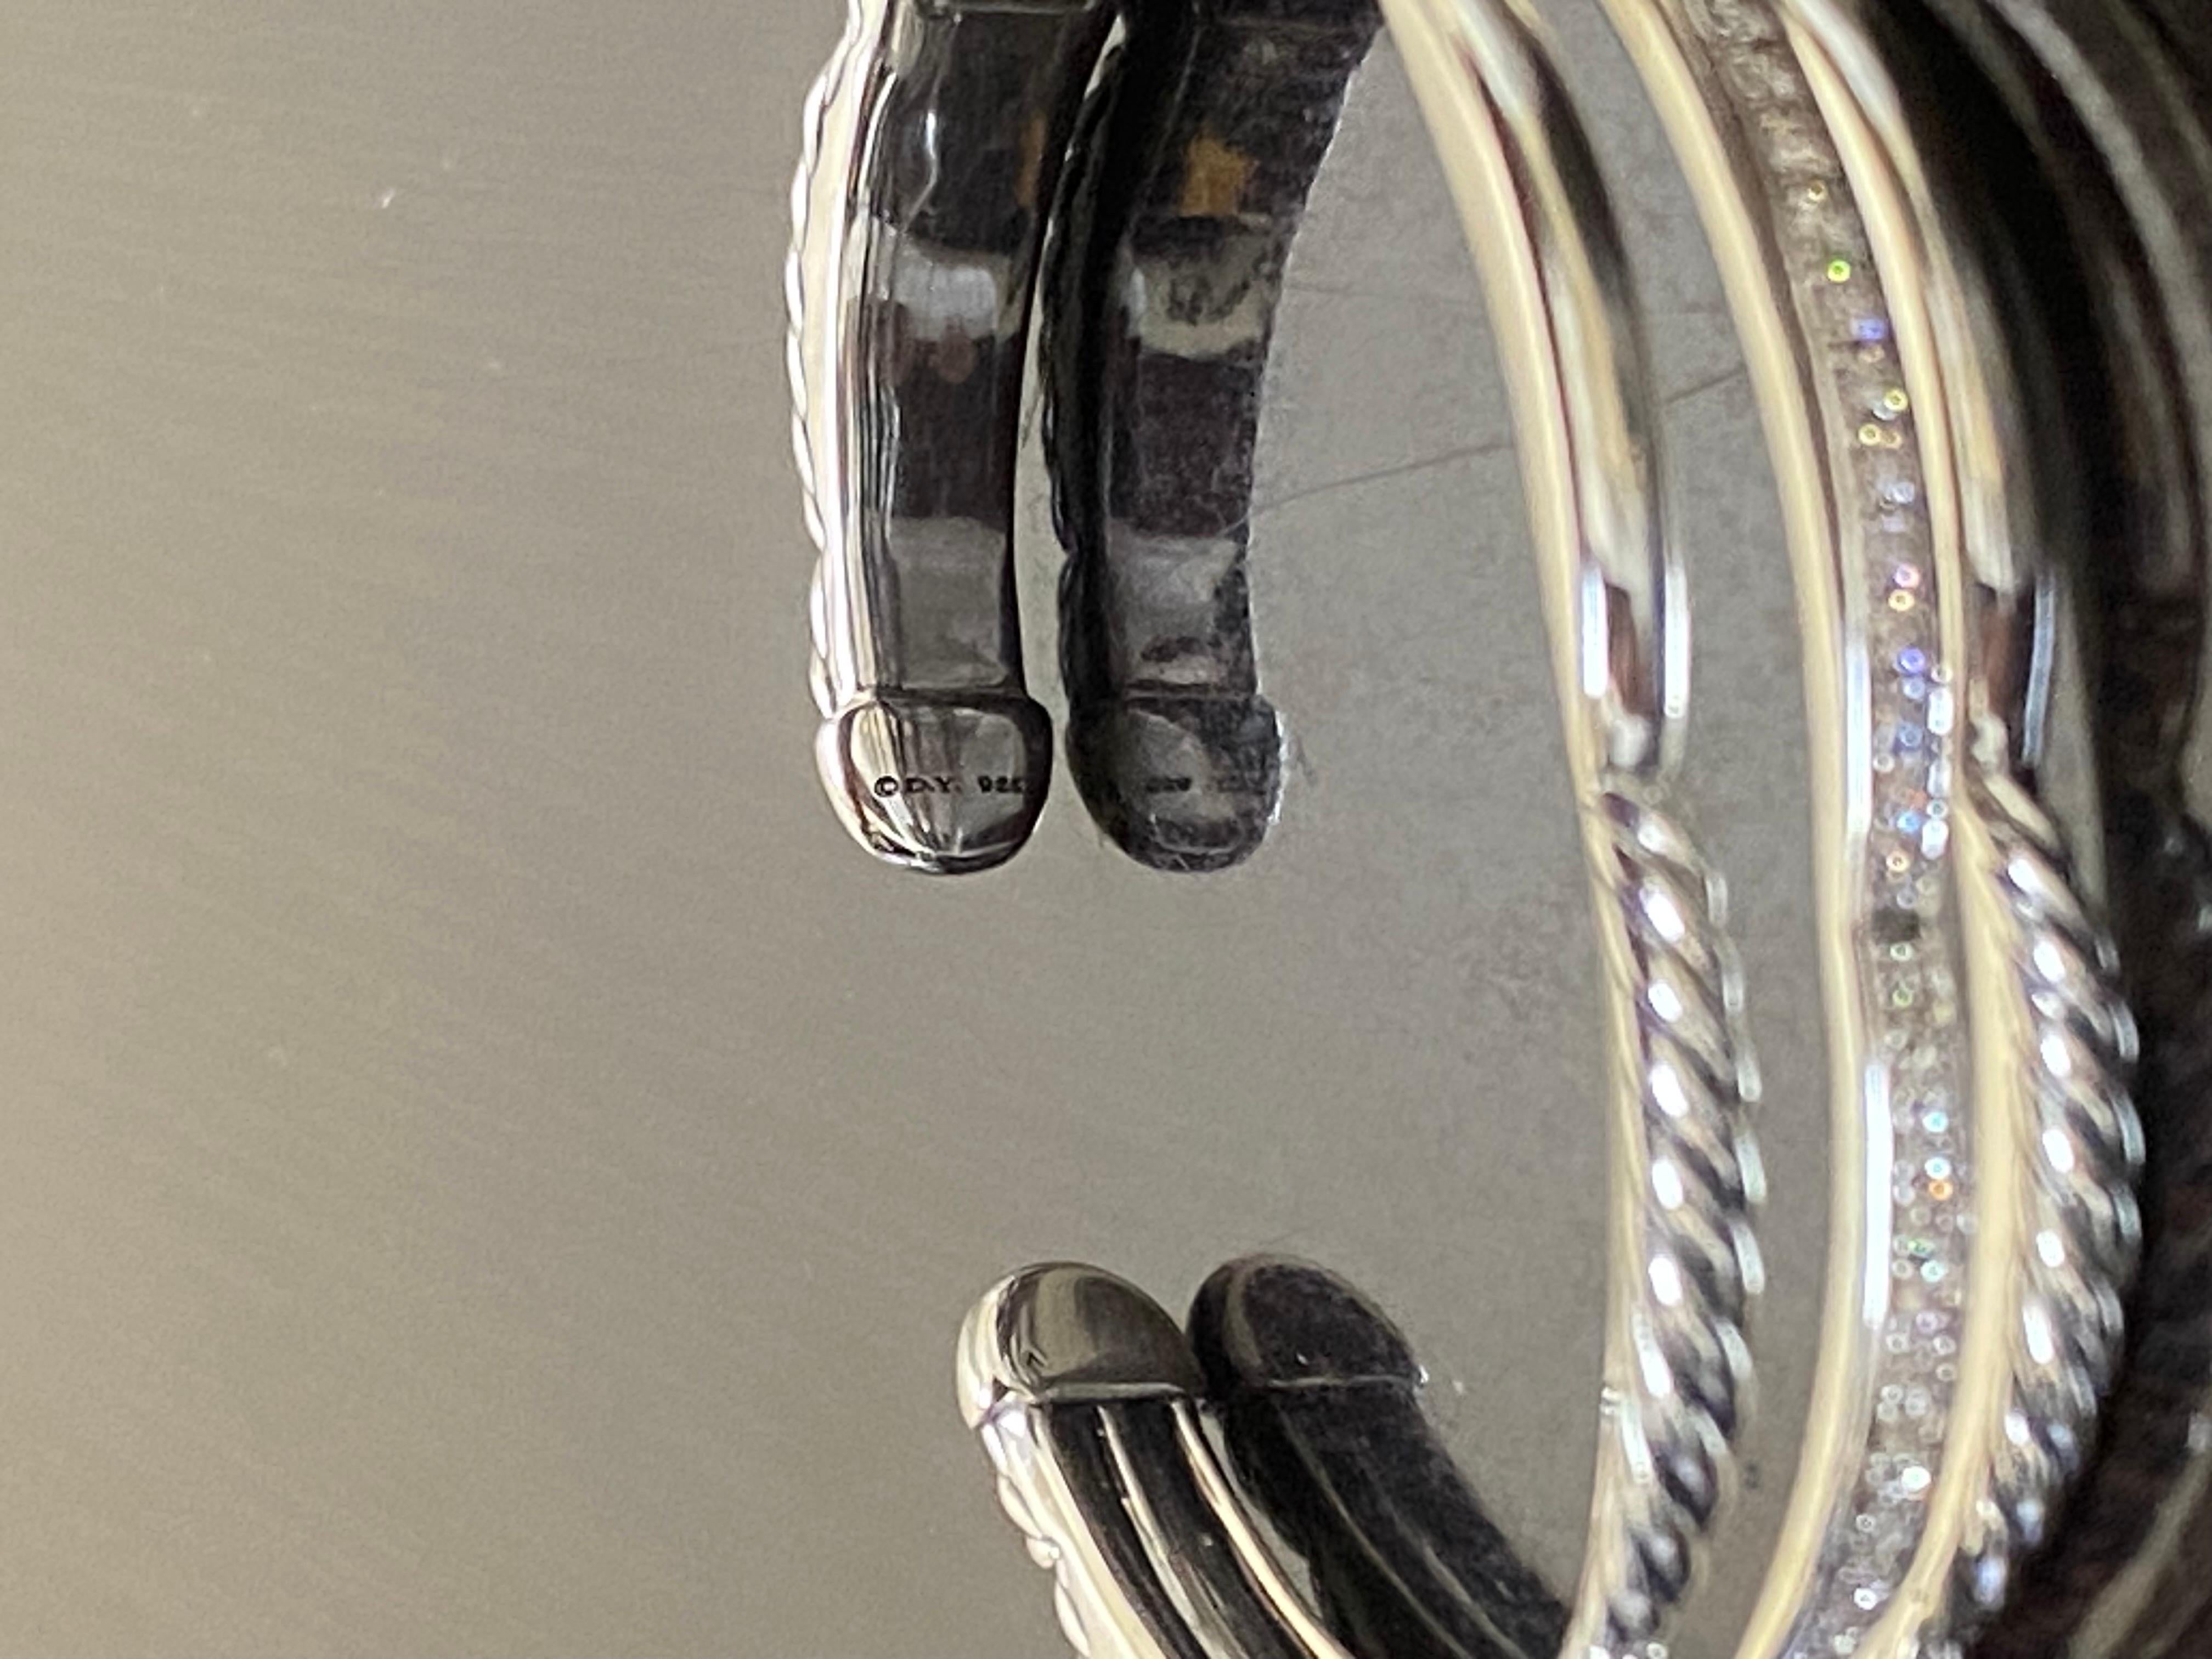 DeKara Designs Desinger Collection

Metal- Sterling Silver, .925.

Stones- 48 Round Diamonds G-H Color VS2 Clarity 0.61 Carats.

RARE Authentic Pave Diamond David Yurman Handmade Sterling Silver Cuff Bracelet From the Tides Collection. It truly